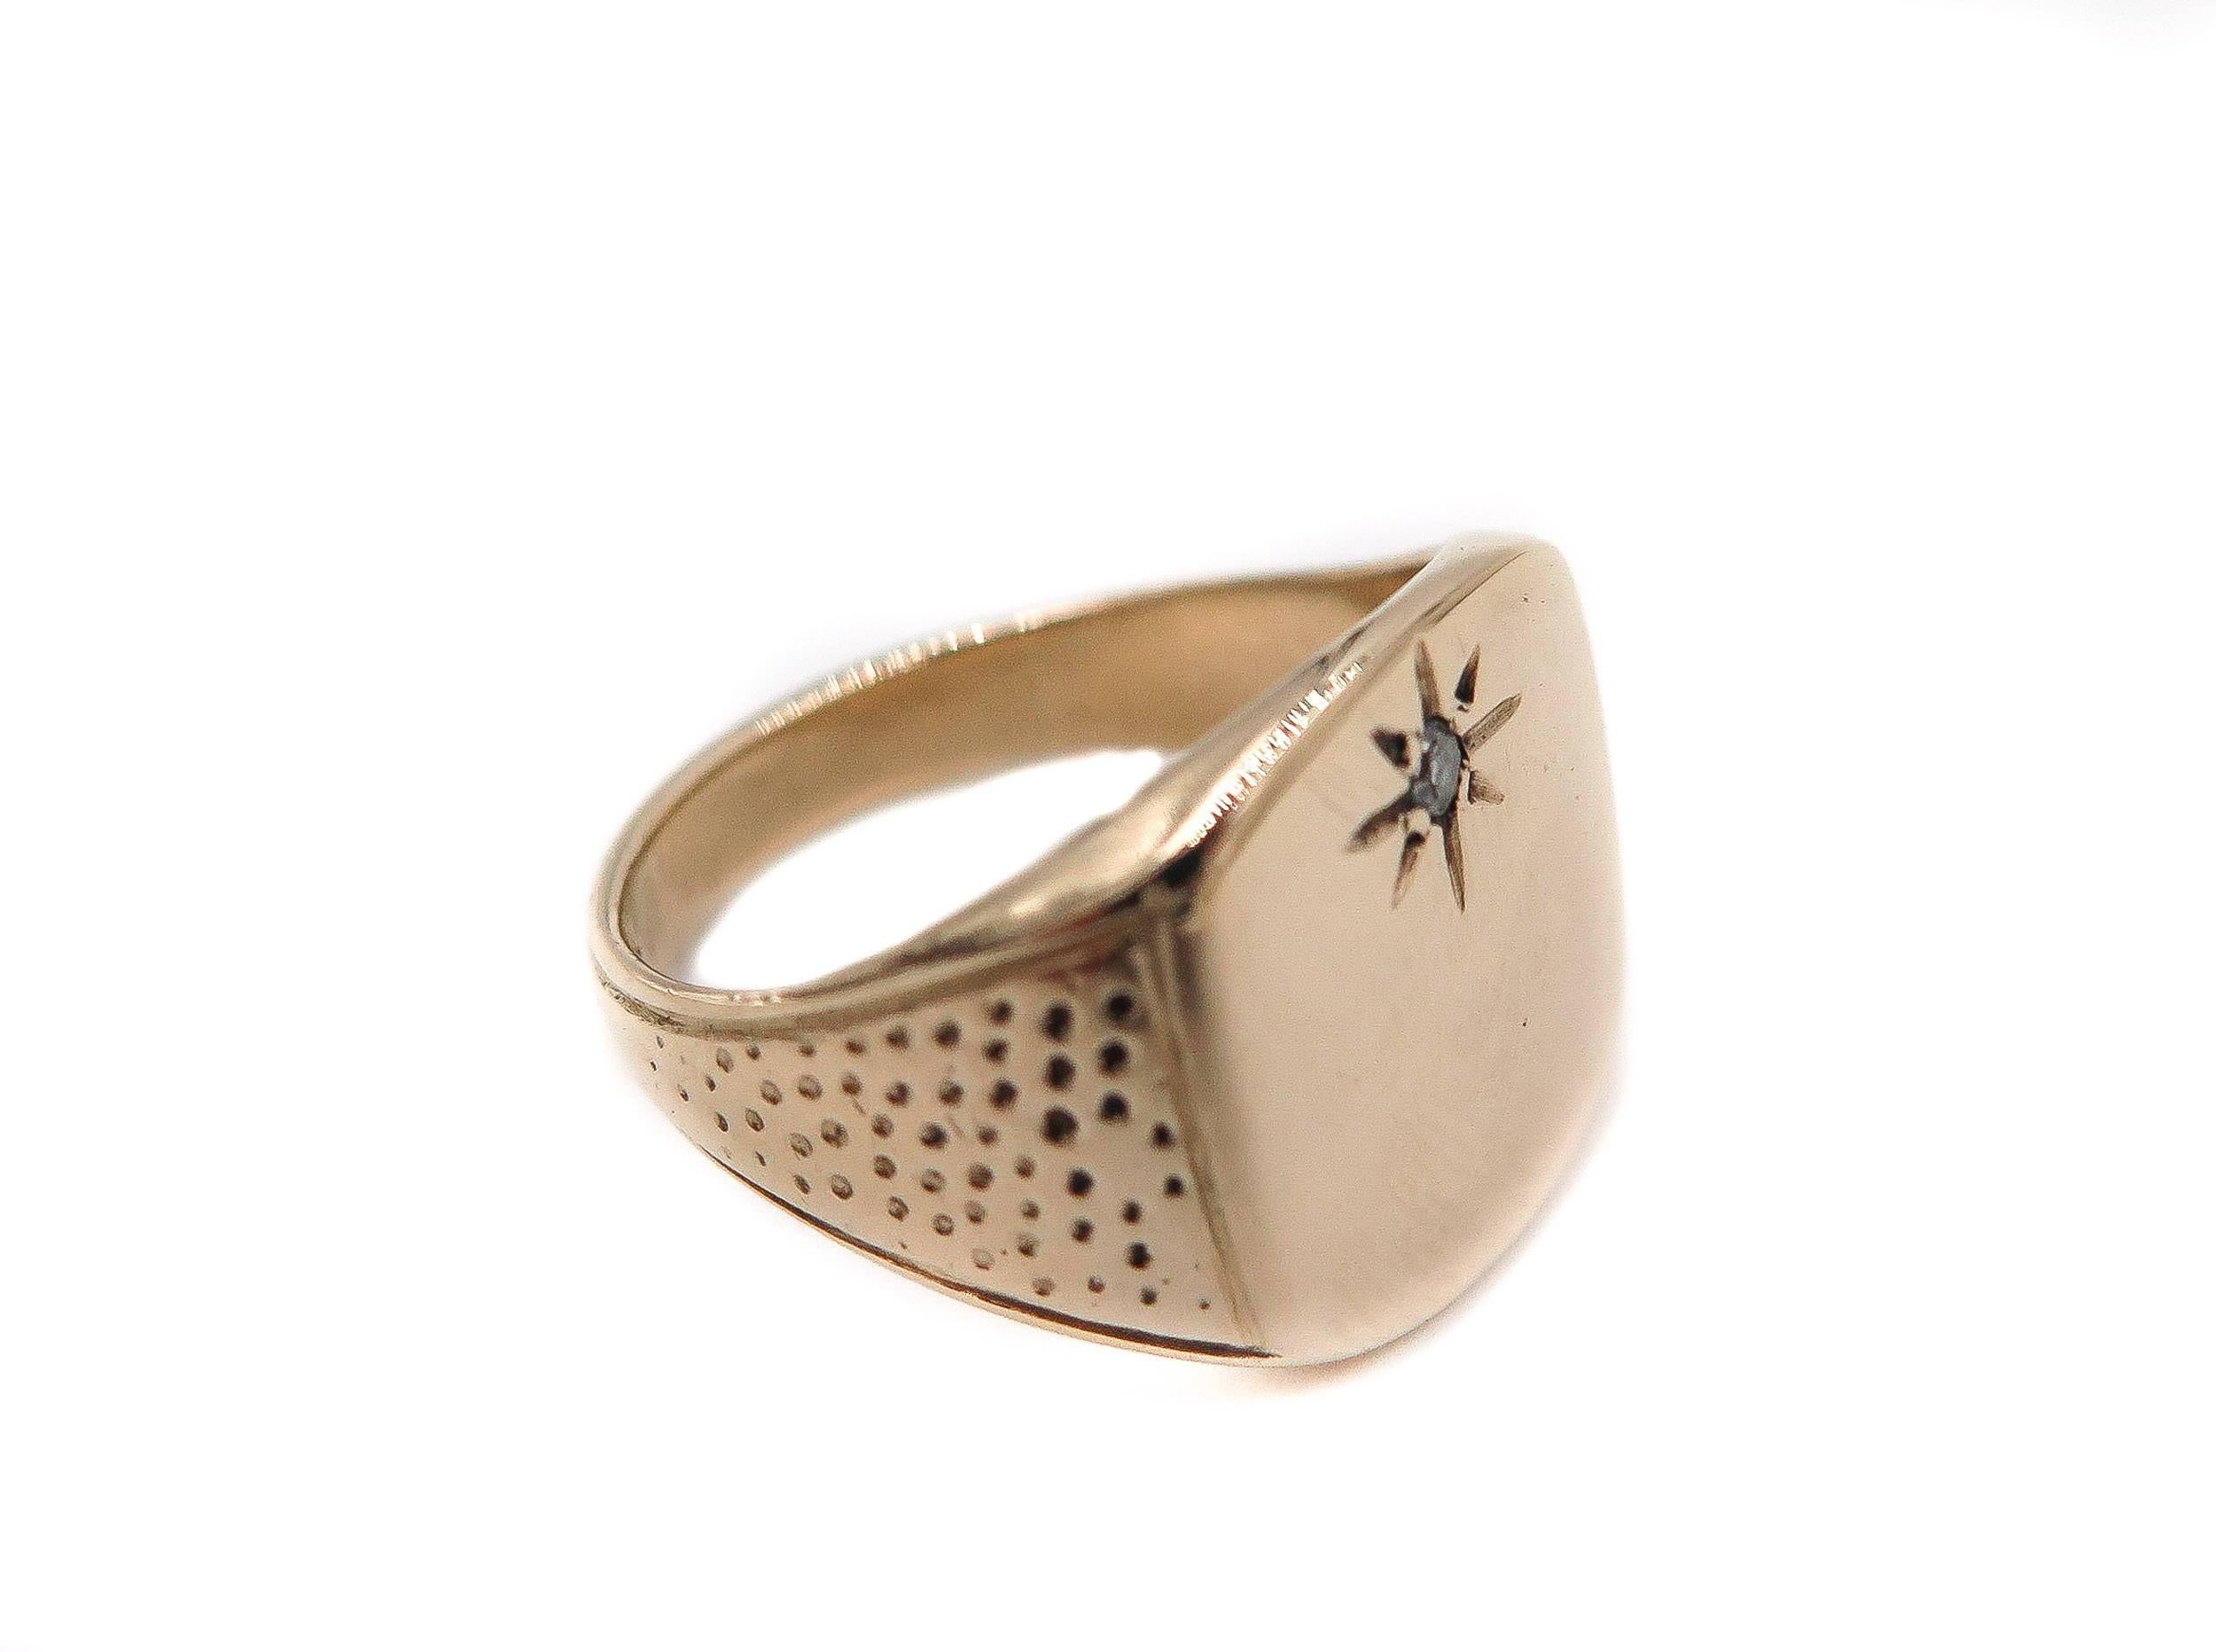 A fine and impressive signet ring handcrafted in 14K yellow gold; part our gent's jewelry and estate jewelry collection.
The cushion shaped face of this signet ring is embellished with a inset round diamond depicting a star.
The flared dotted ring